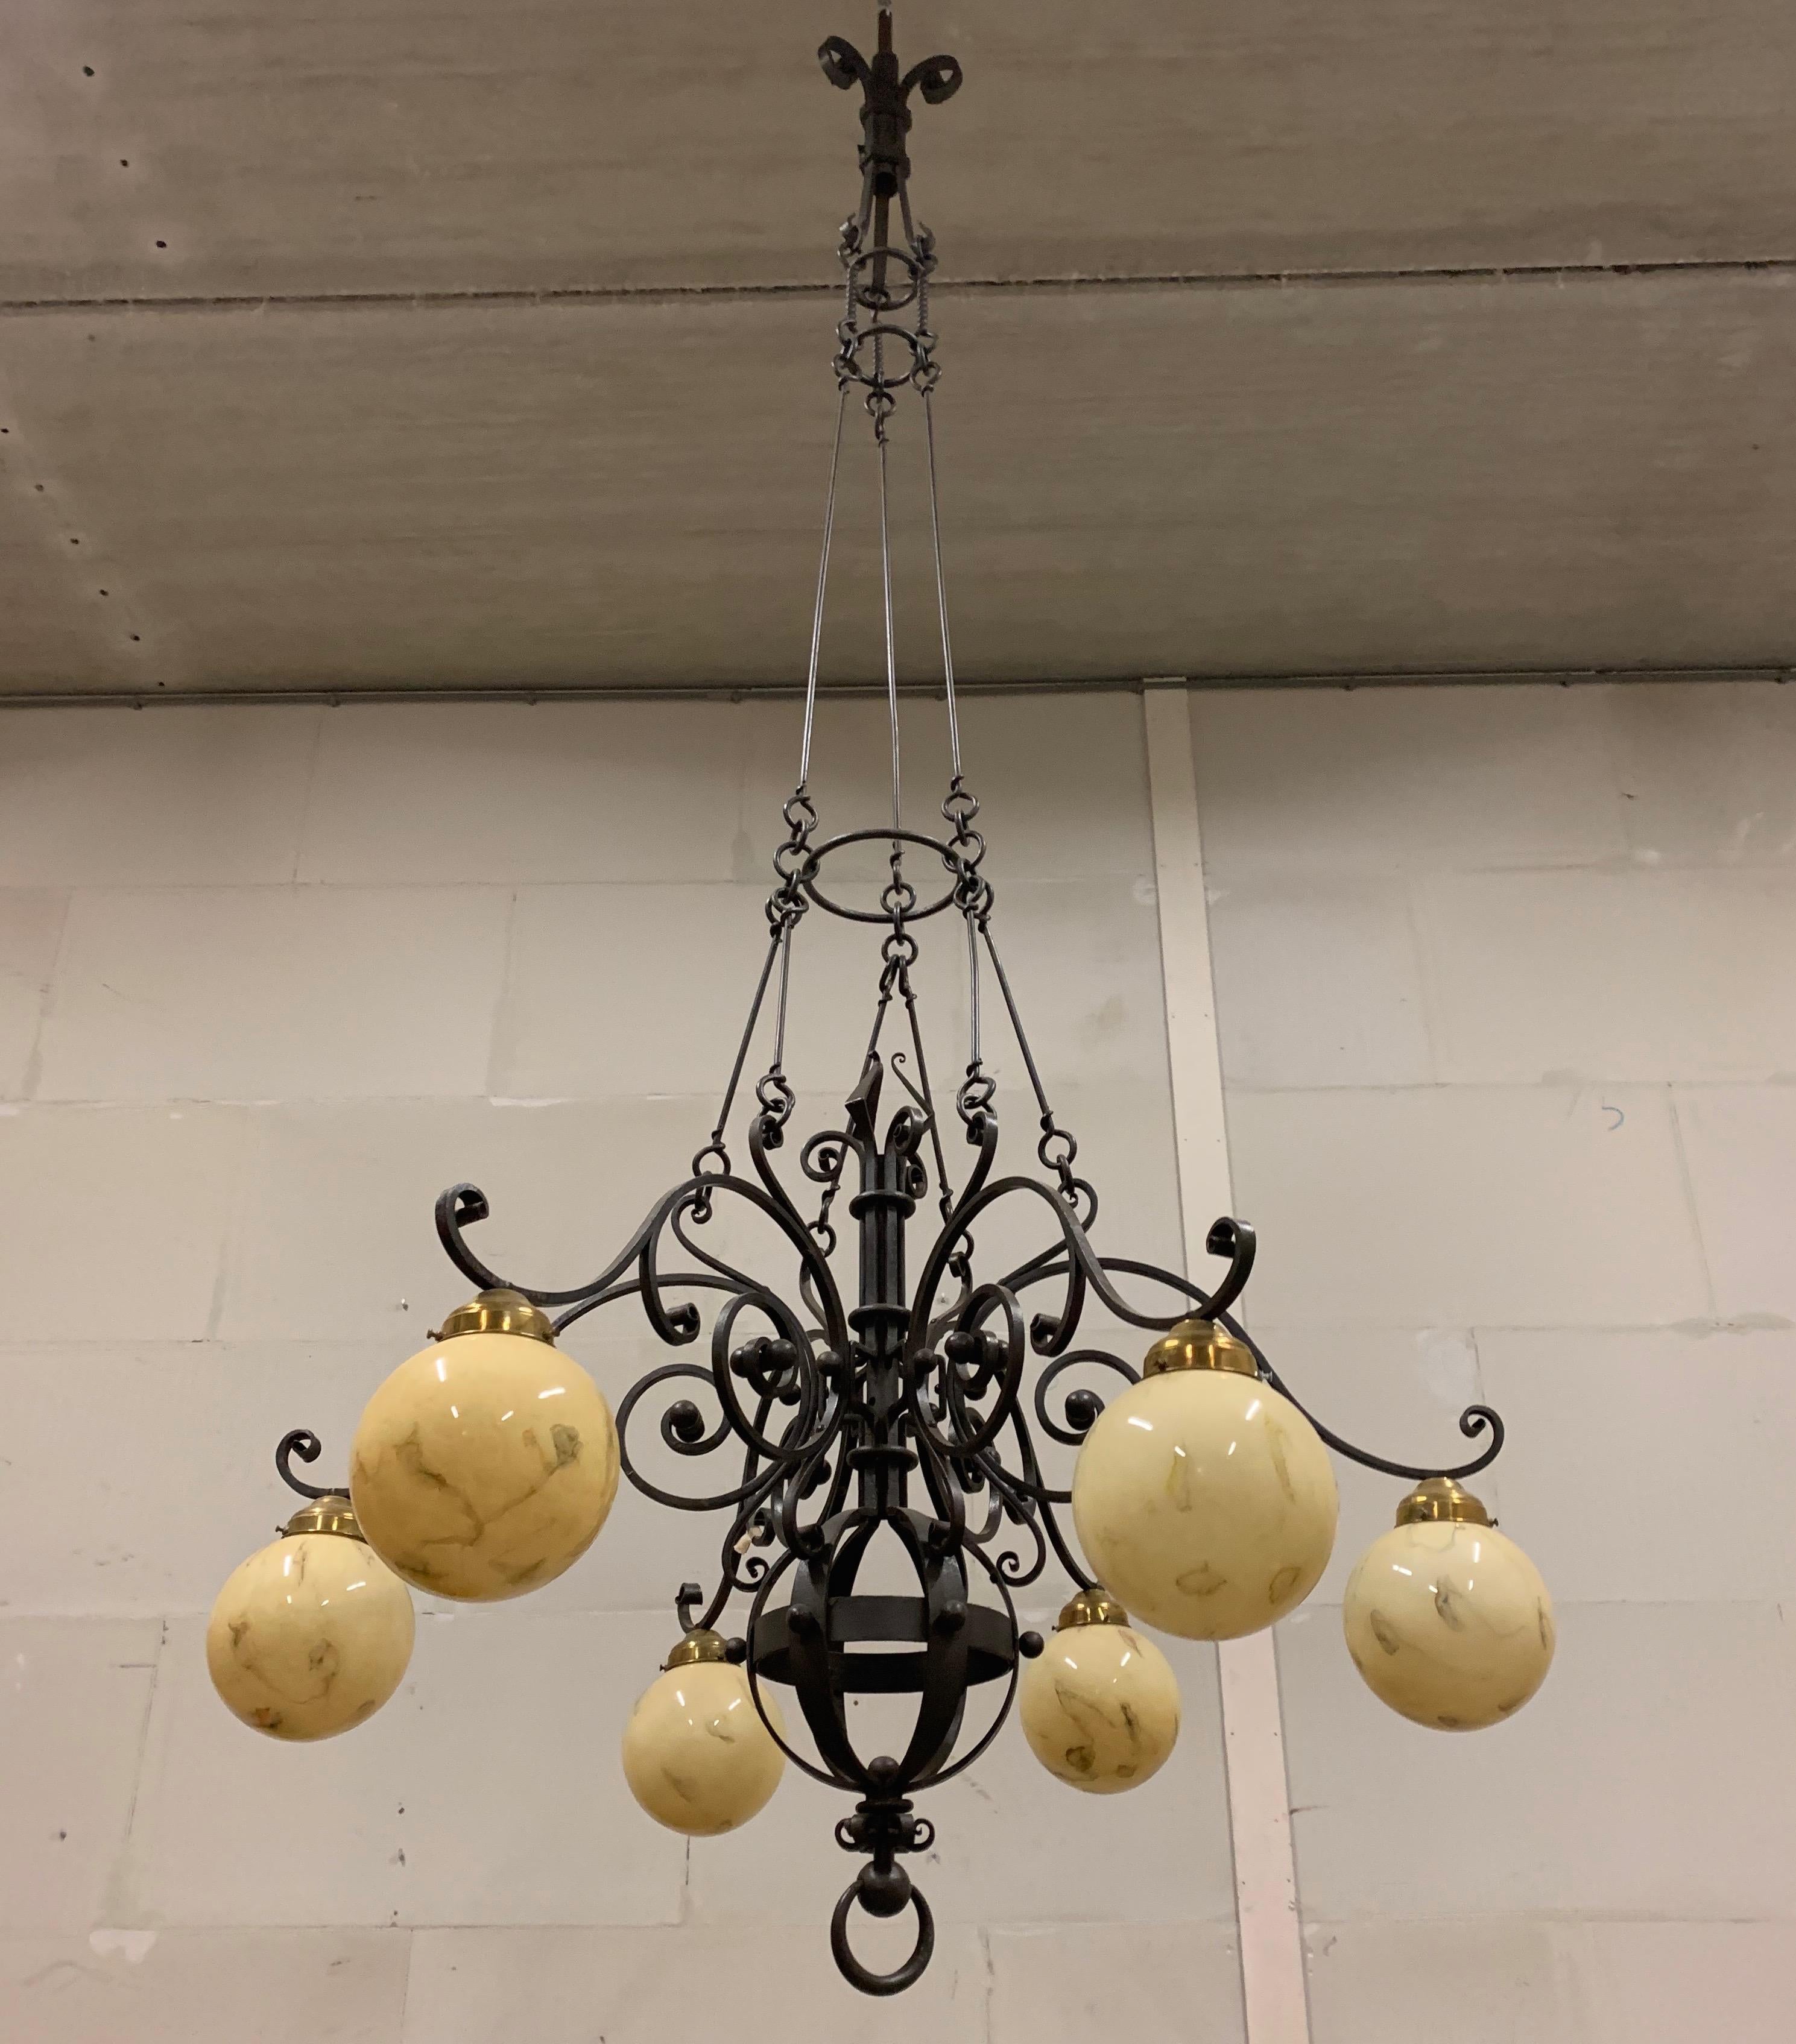  Huge 9 Feet High, Arts & Crafts Wrought Iron, Marbled Glass Chandelier Pendant  For Sale 7